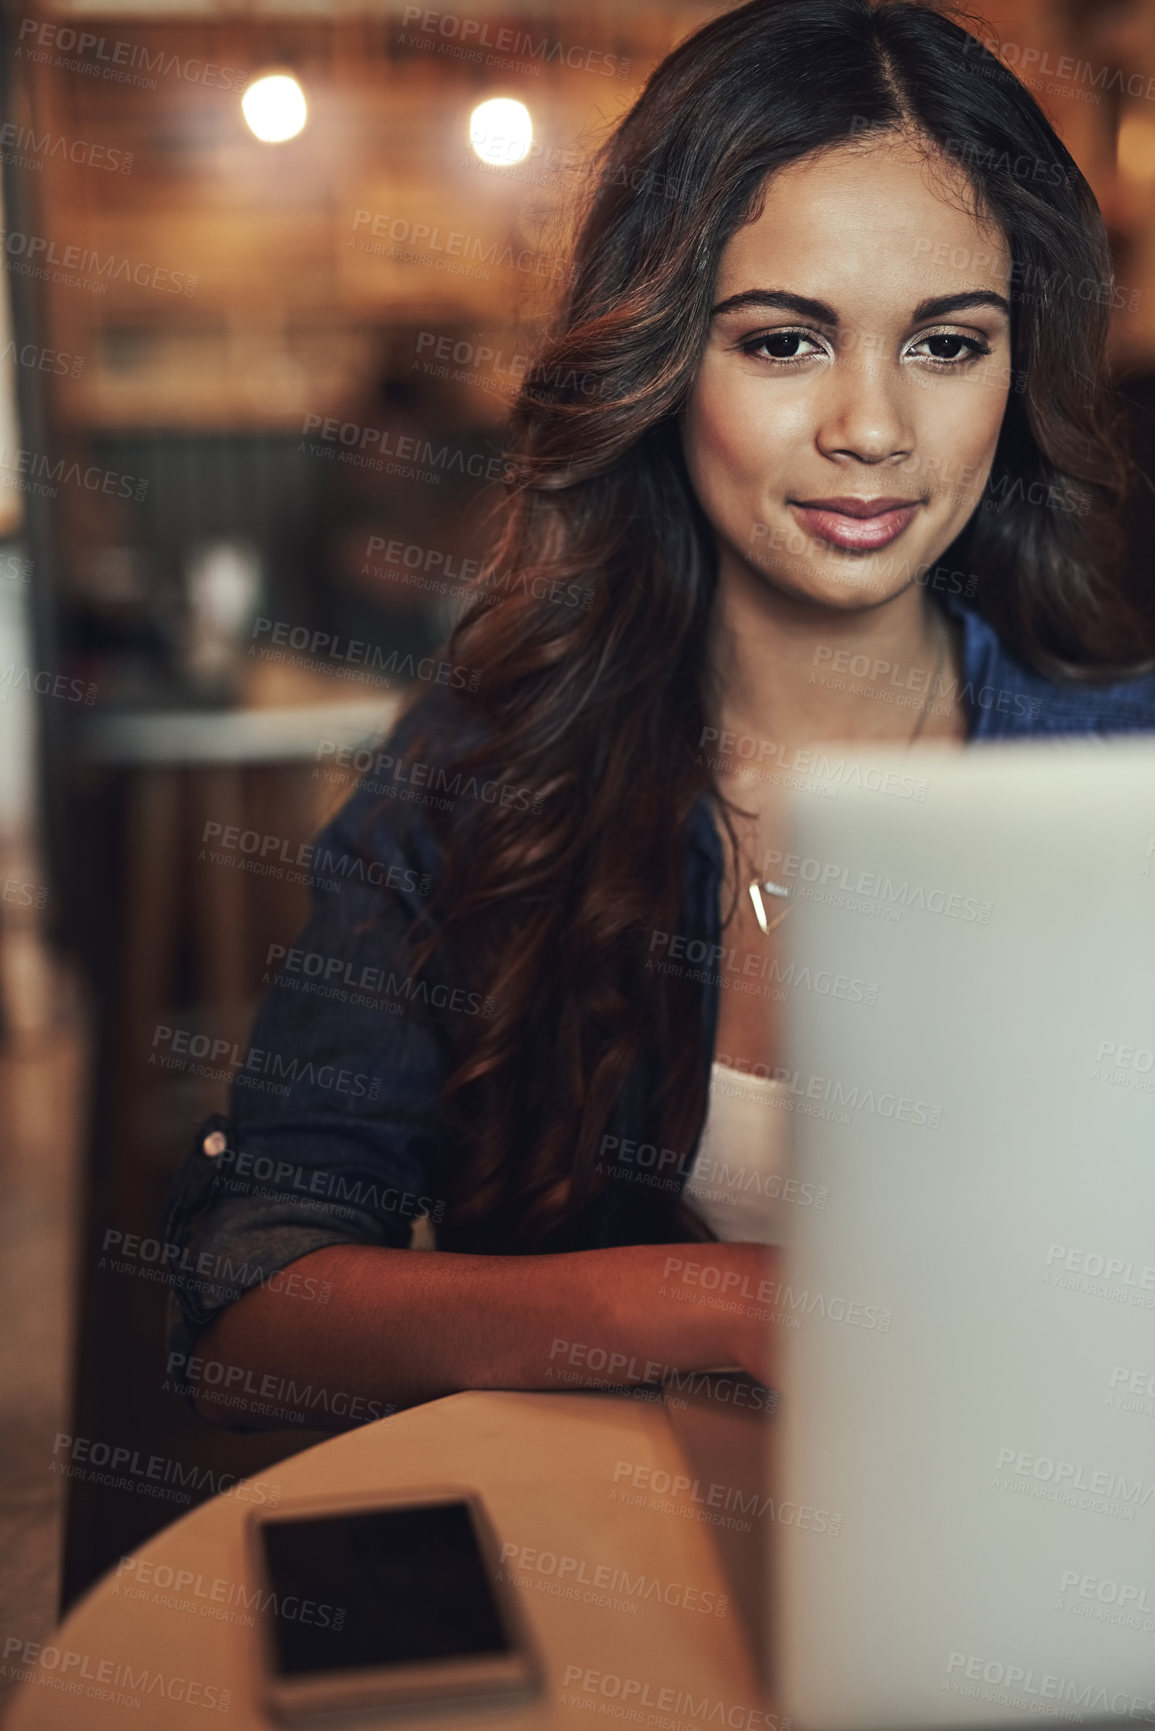 Buy stock photo Shot of a relaxed young woman using her laptop in a coffee shop